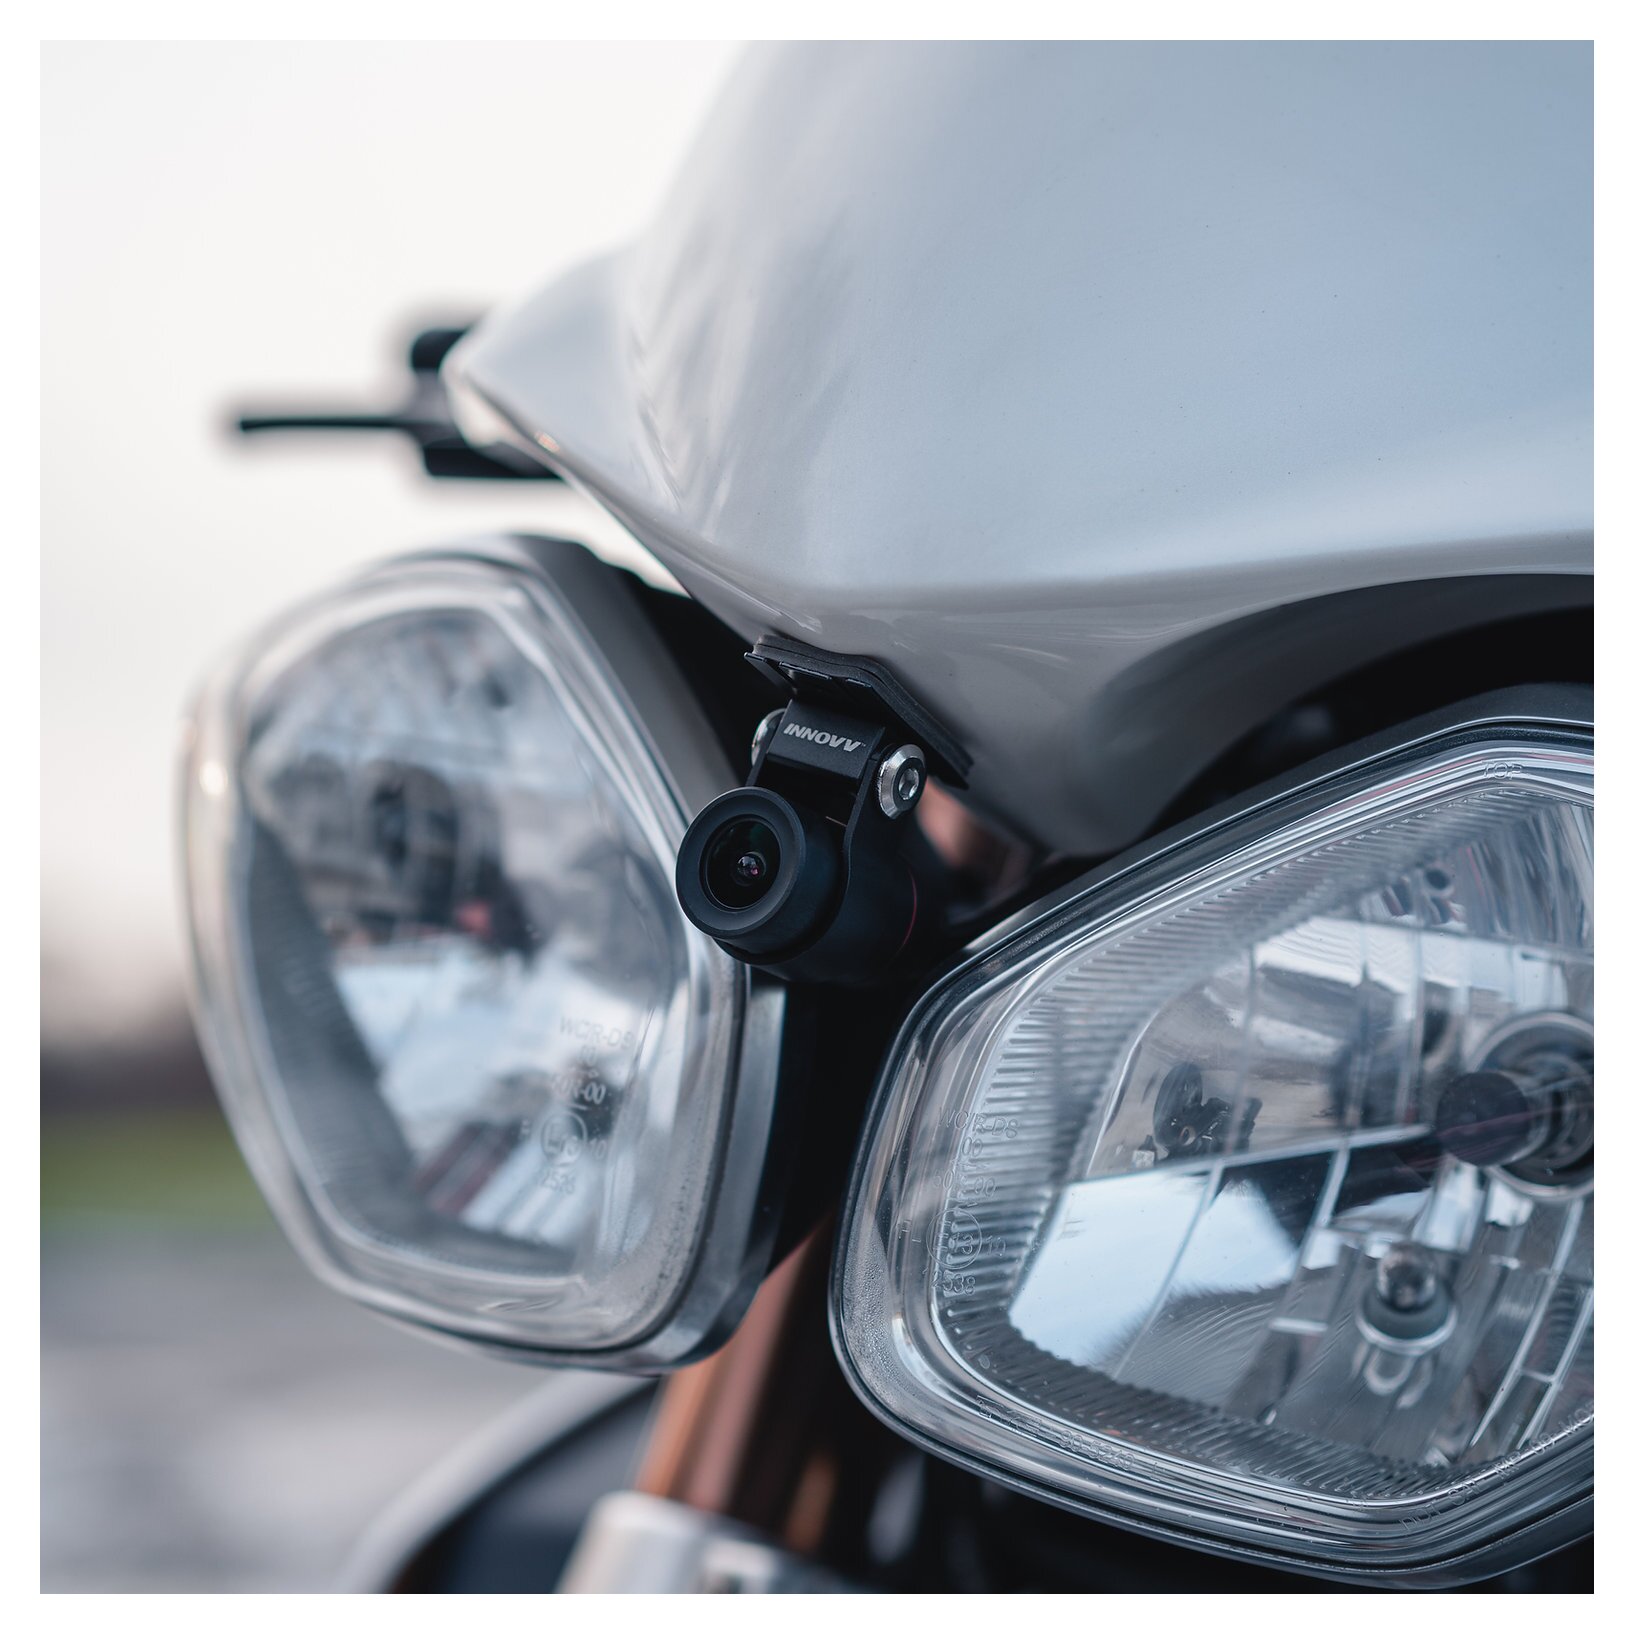 An image of the INNOVV K5 mounted in between the headlights of the Triumph Speed Triple.